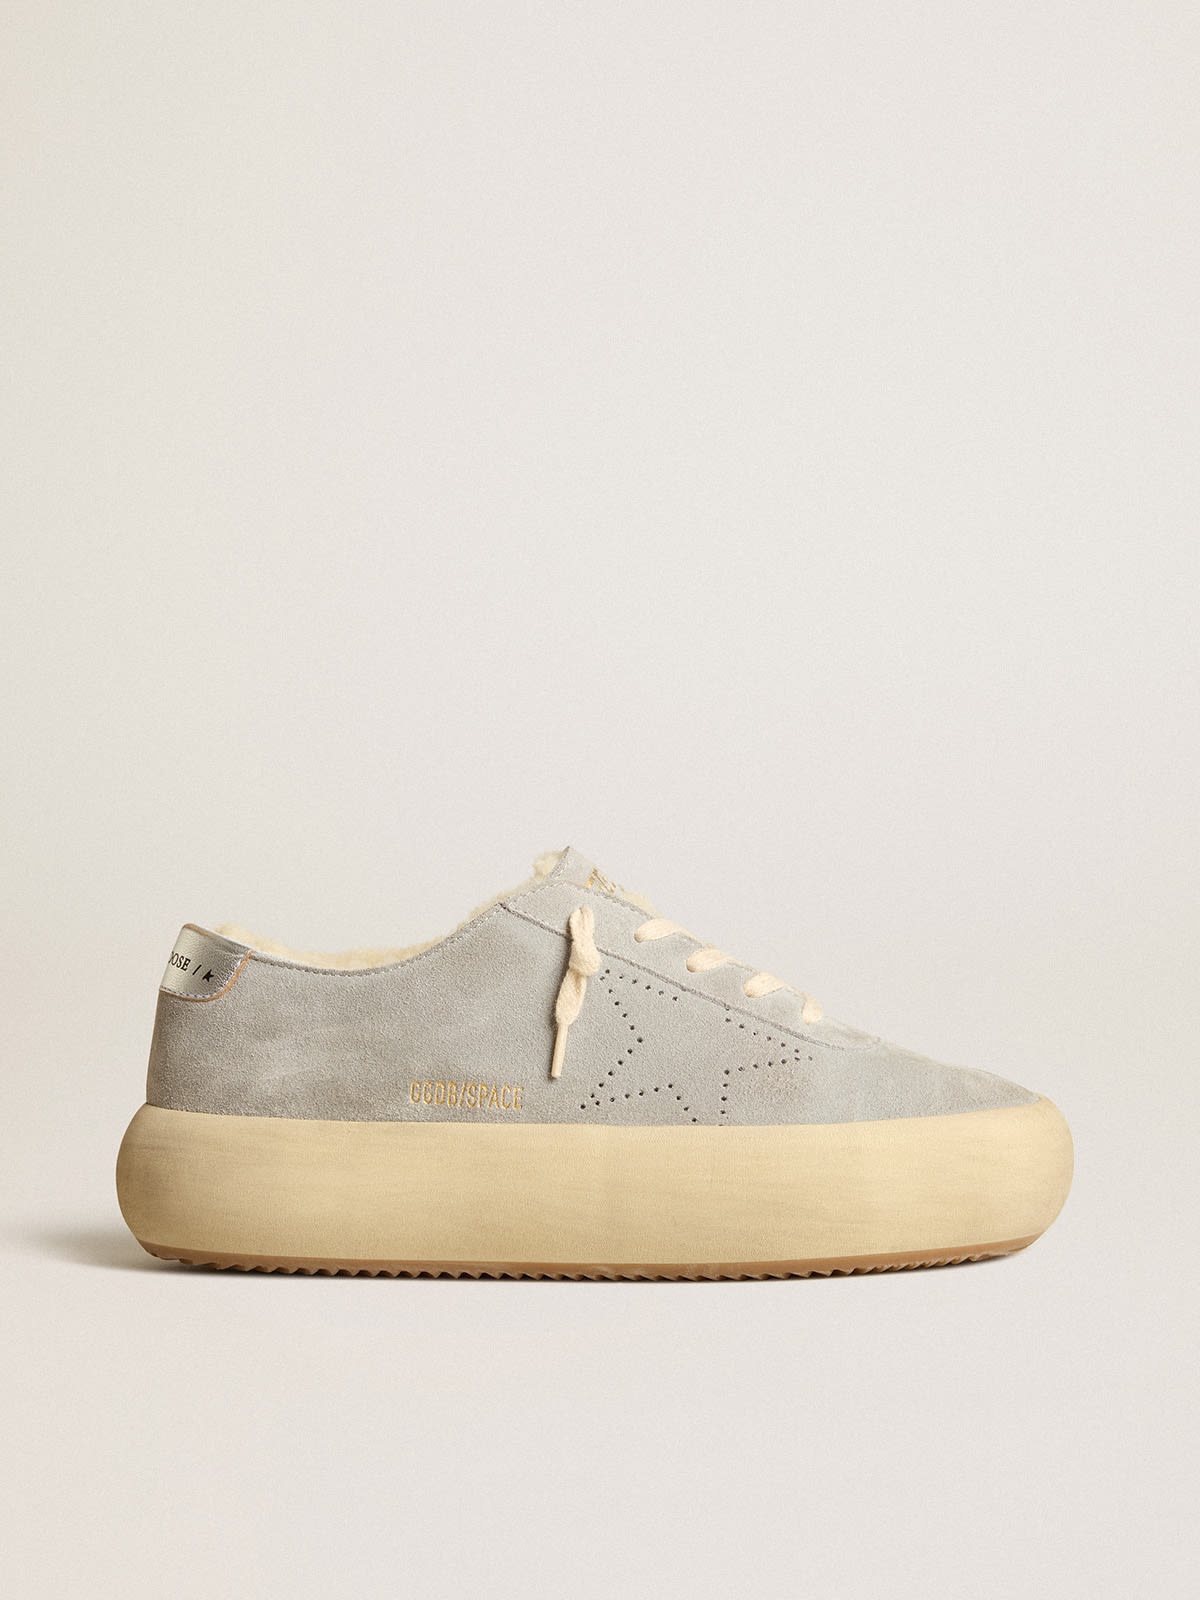 Women’s Space-Star shoes in ice-gray suede with shearling lining - 1